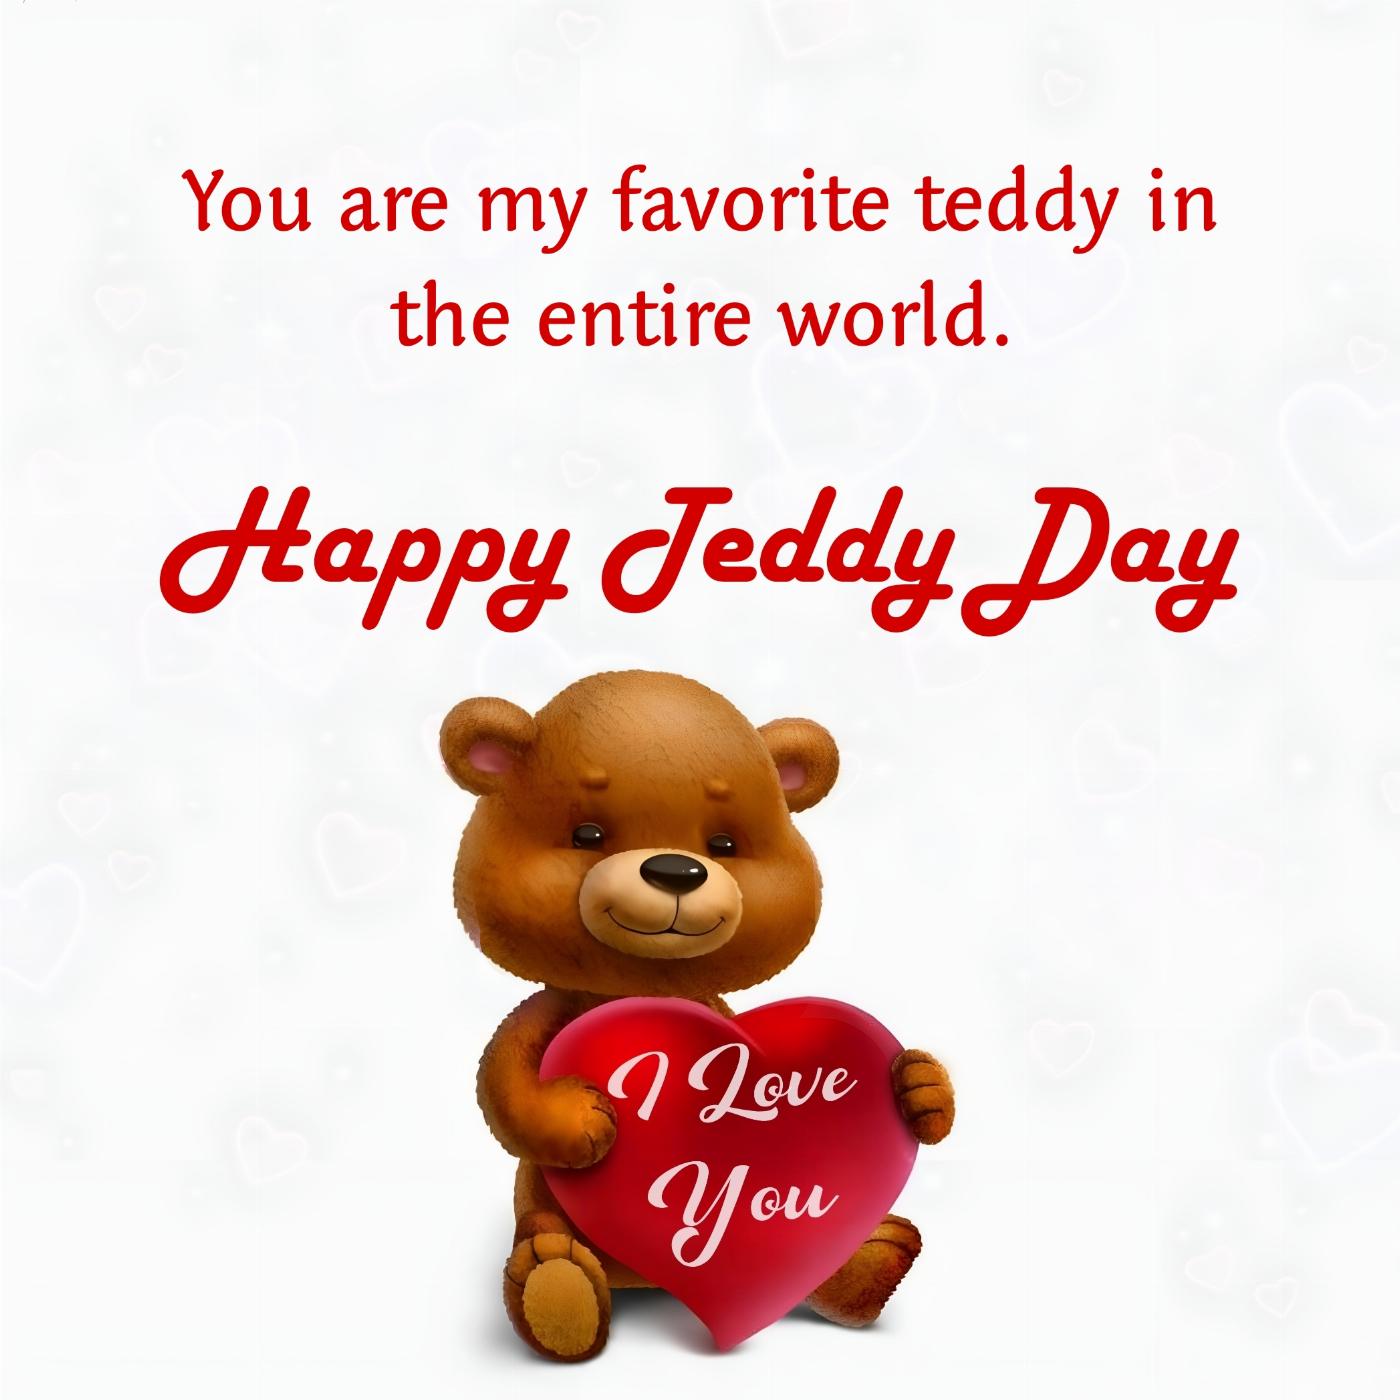 You are my favorite teddy in the entire world